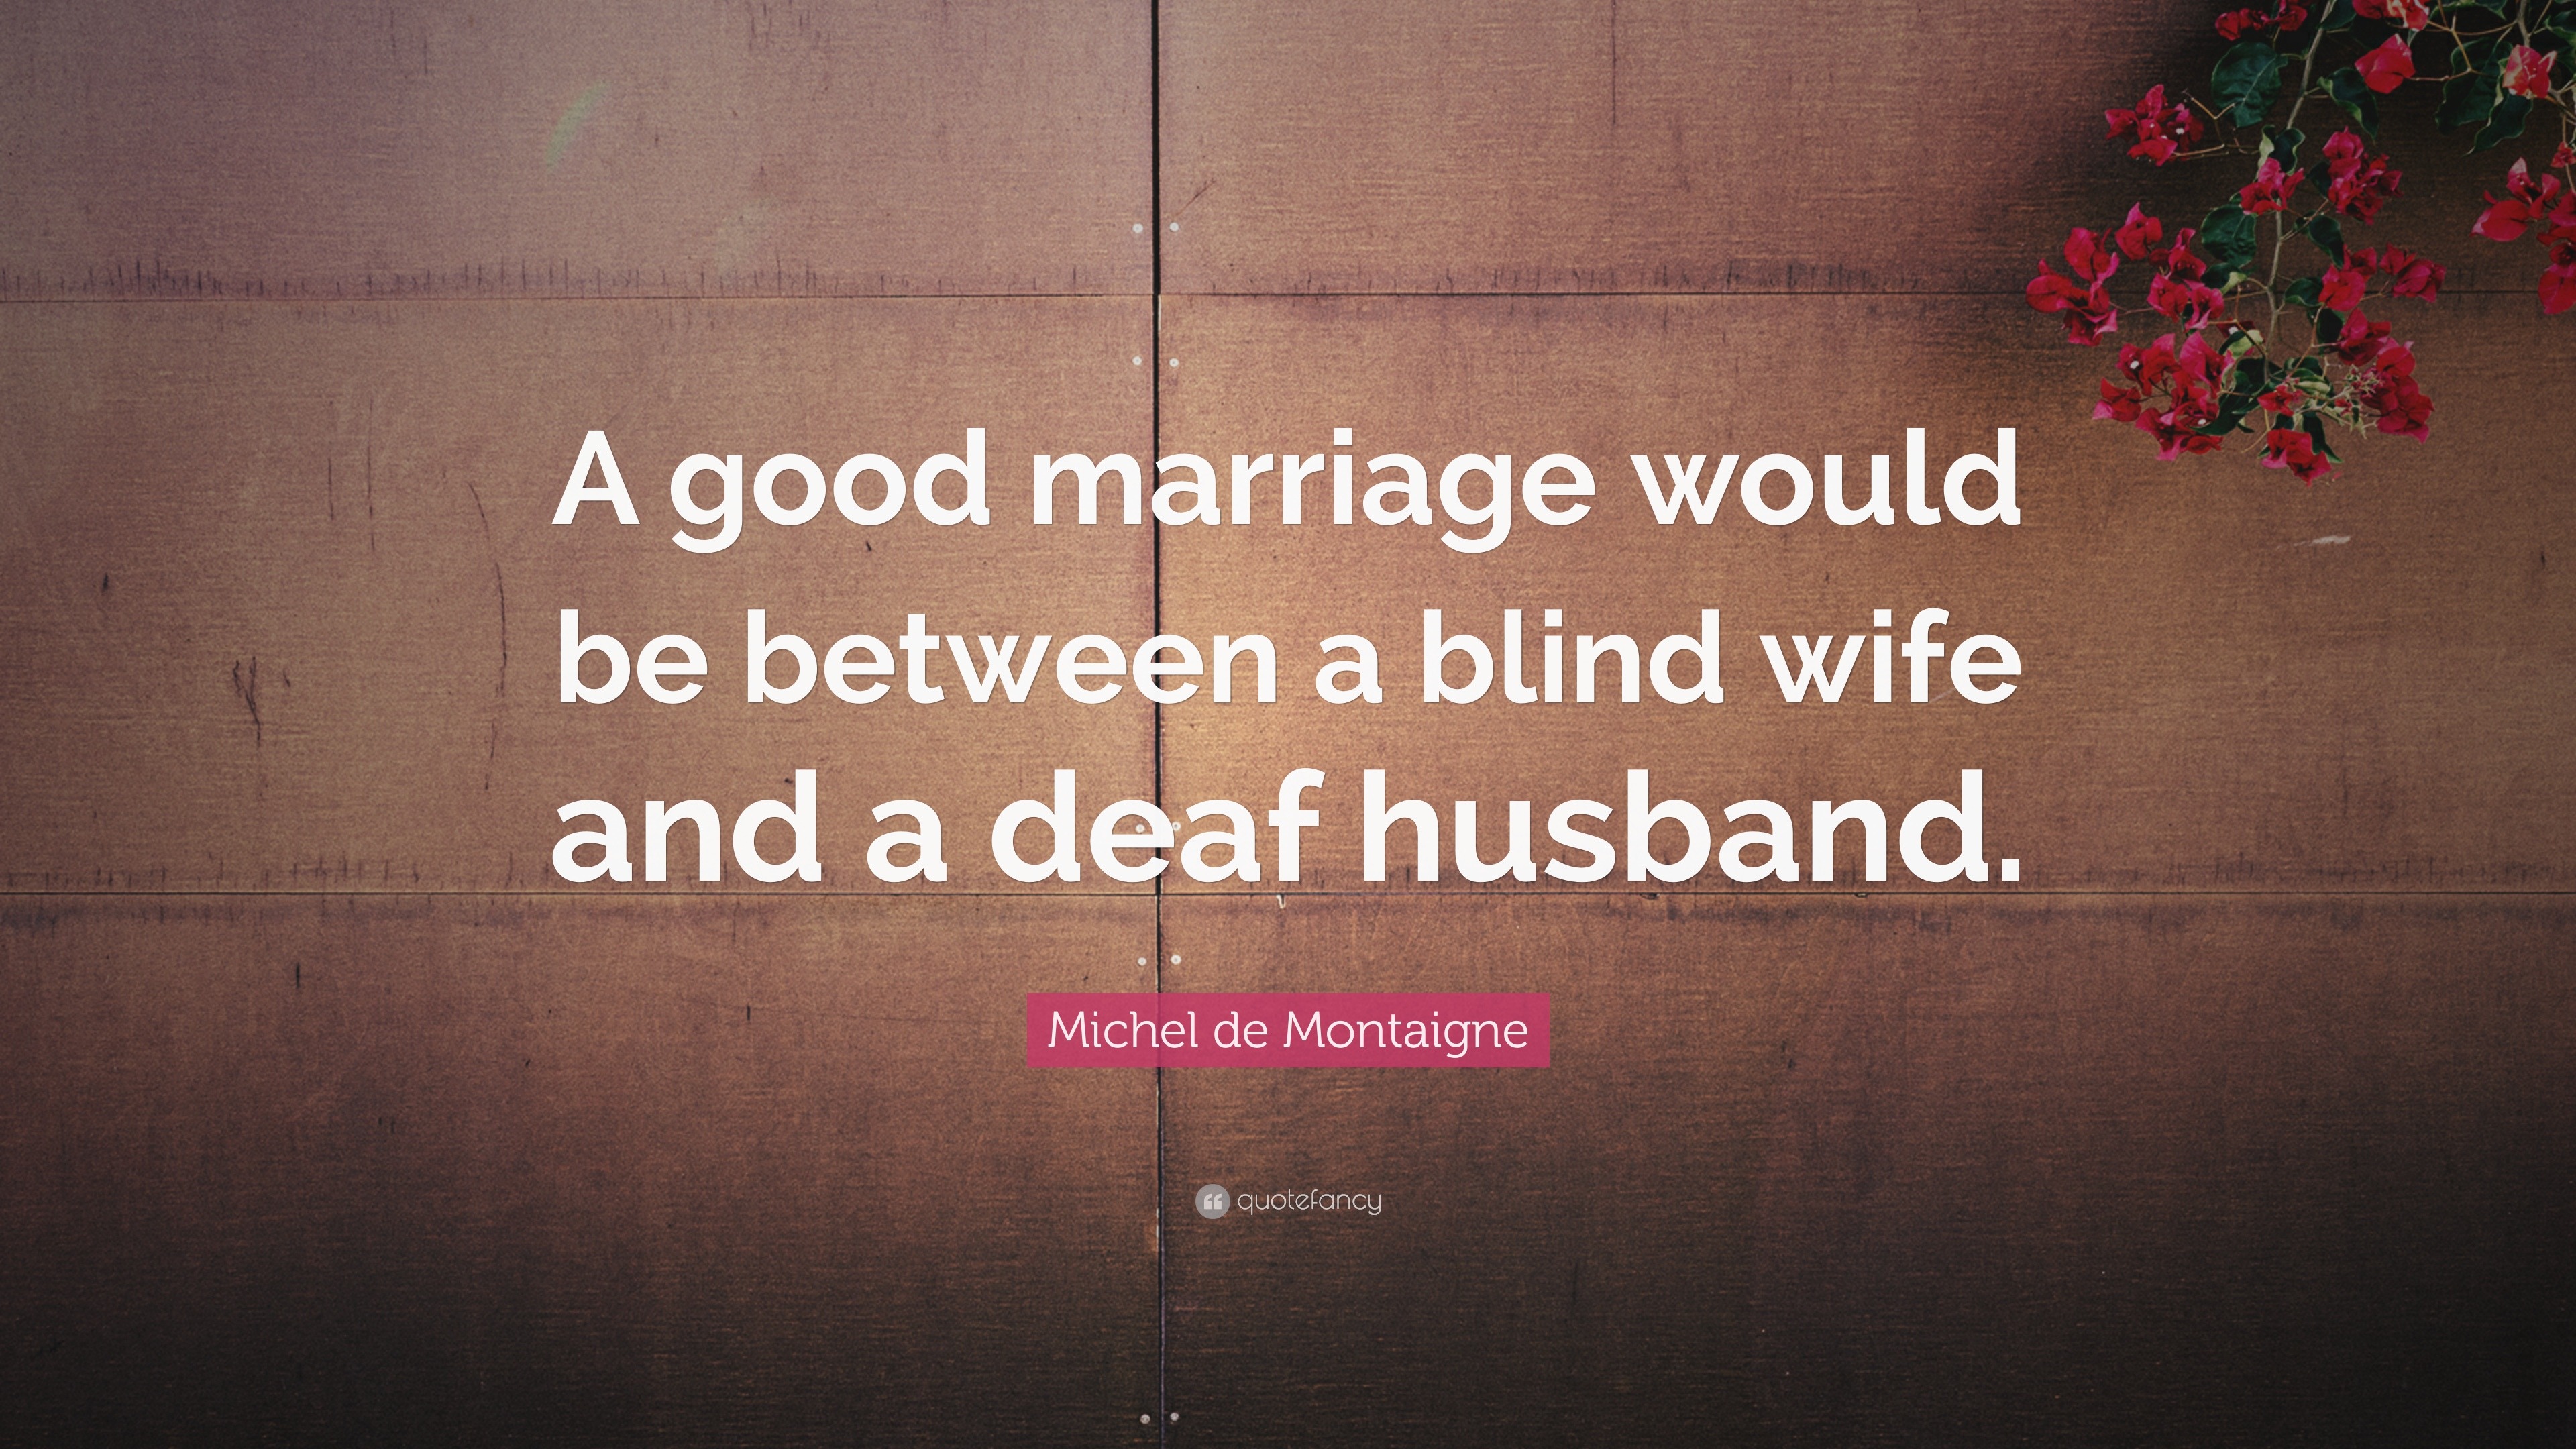 Michel de Montaigne Quote “A good marriage would be between a blind wife and